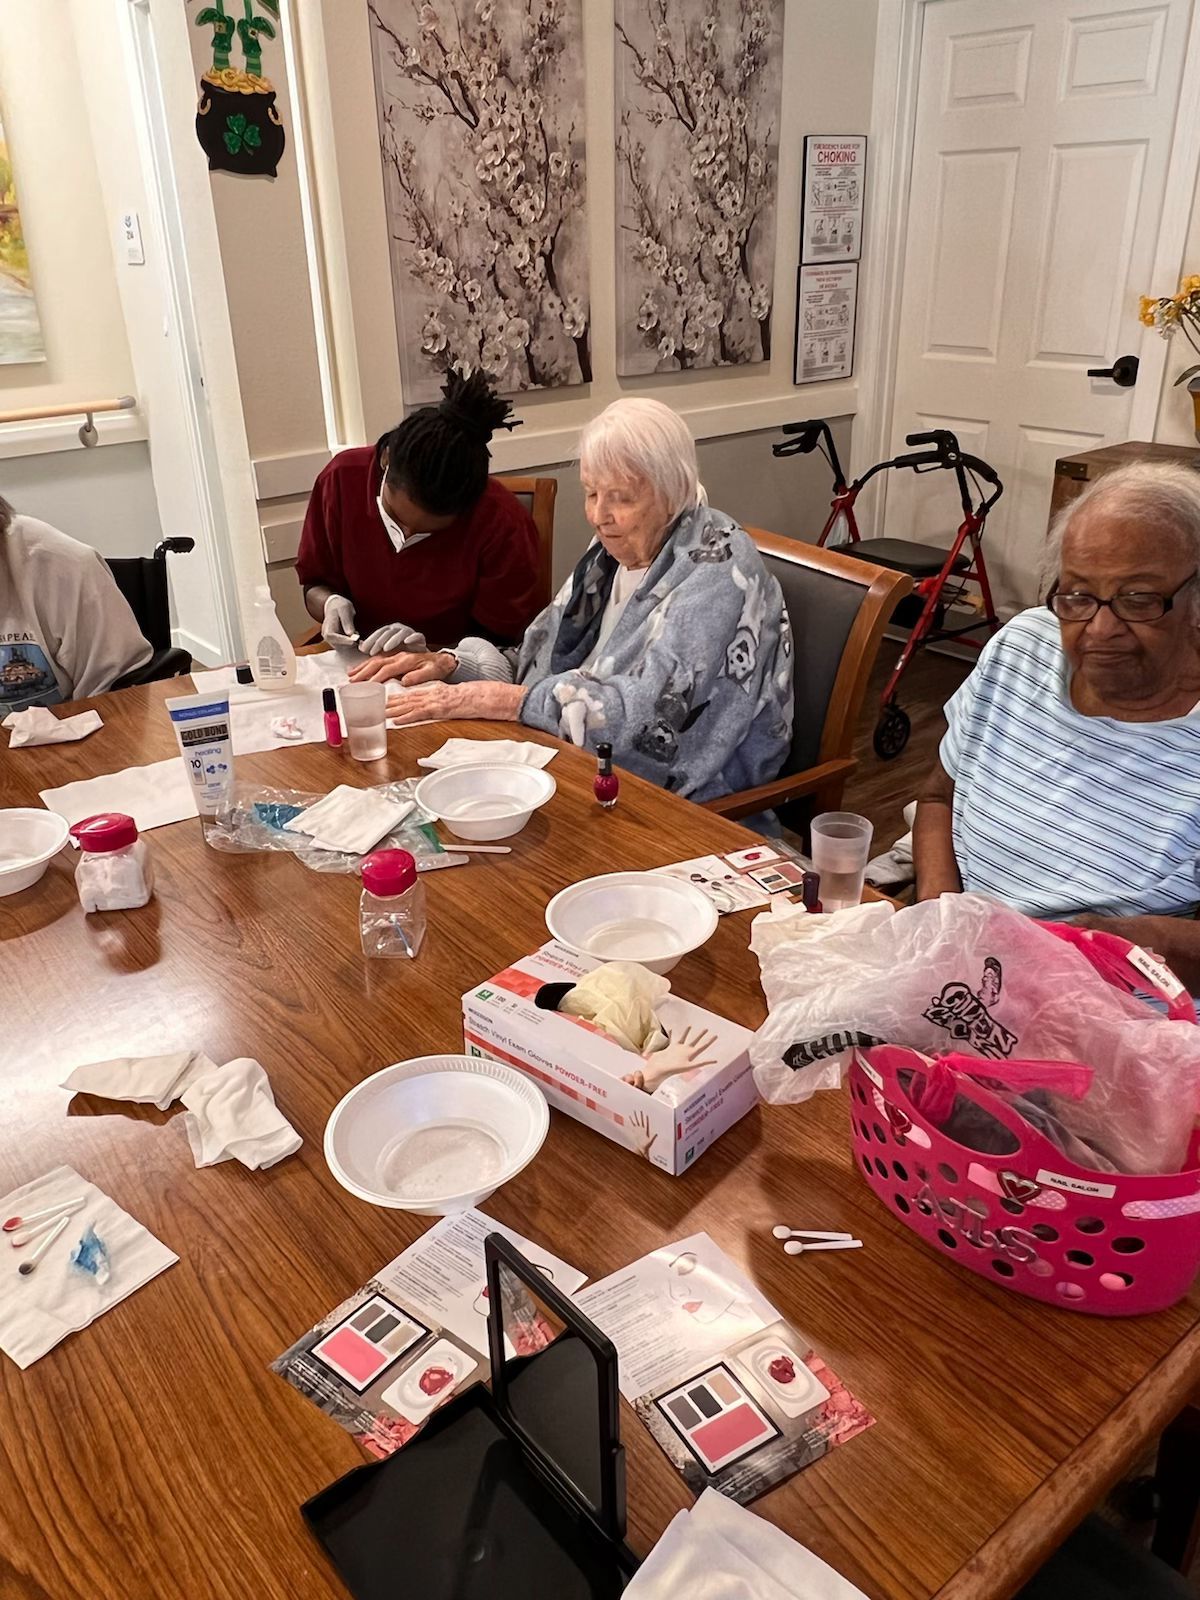 residents getting manicures